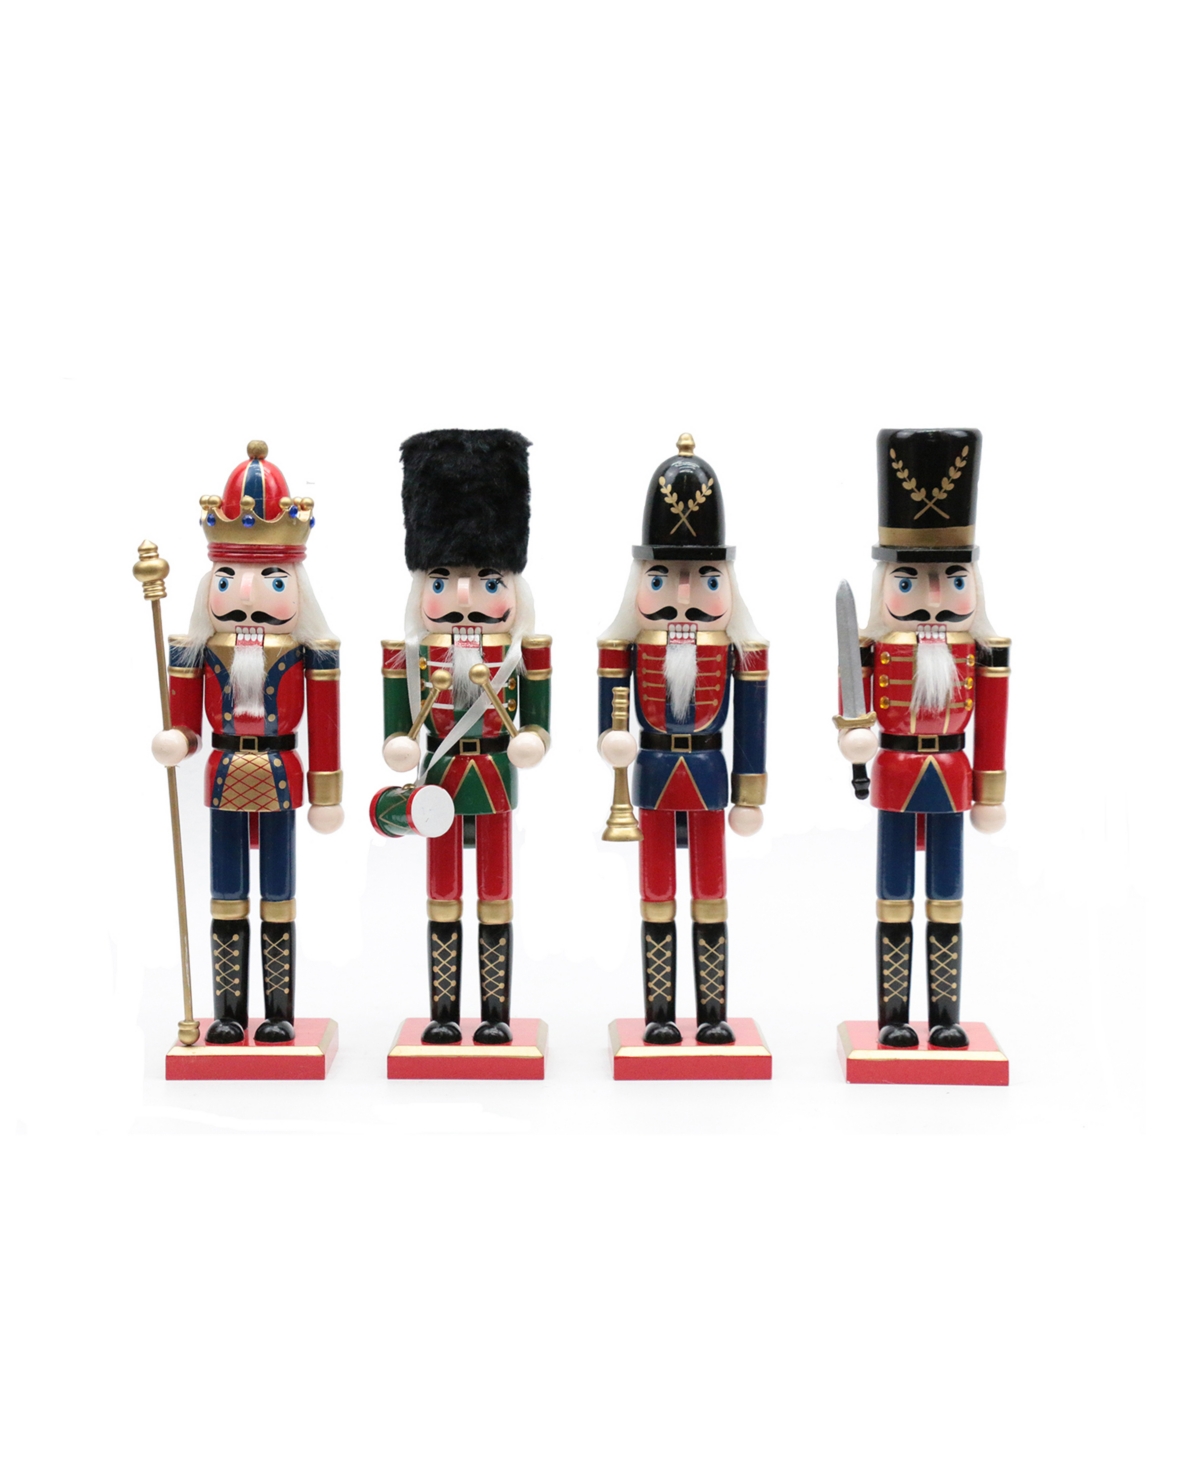 12" King and Guard Nutcrackers, Set of 4 - Multi